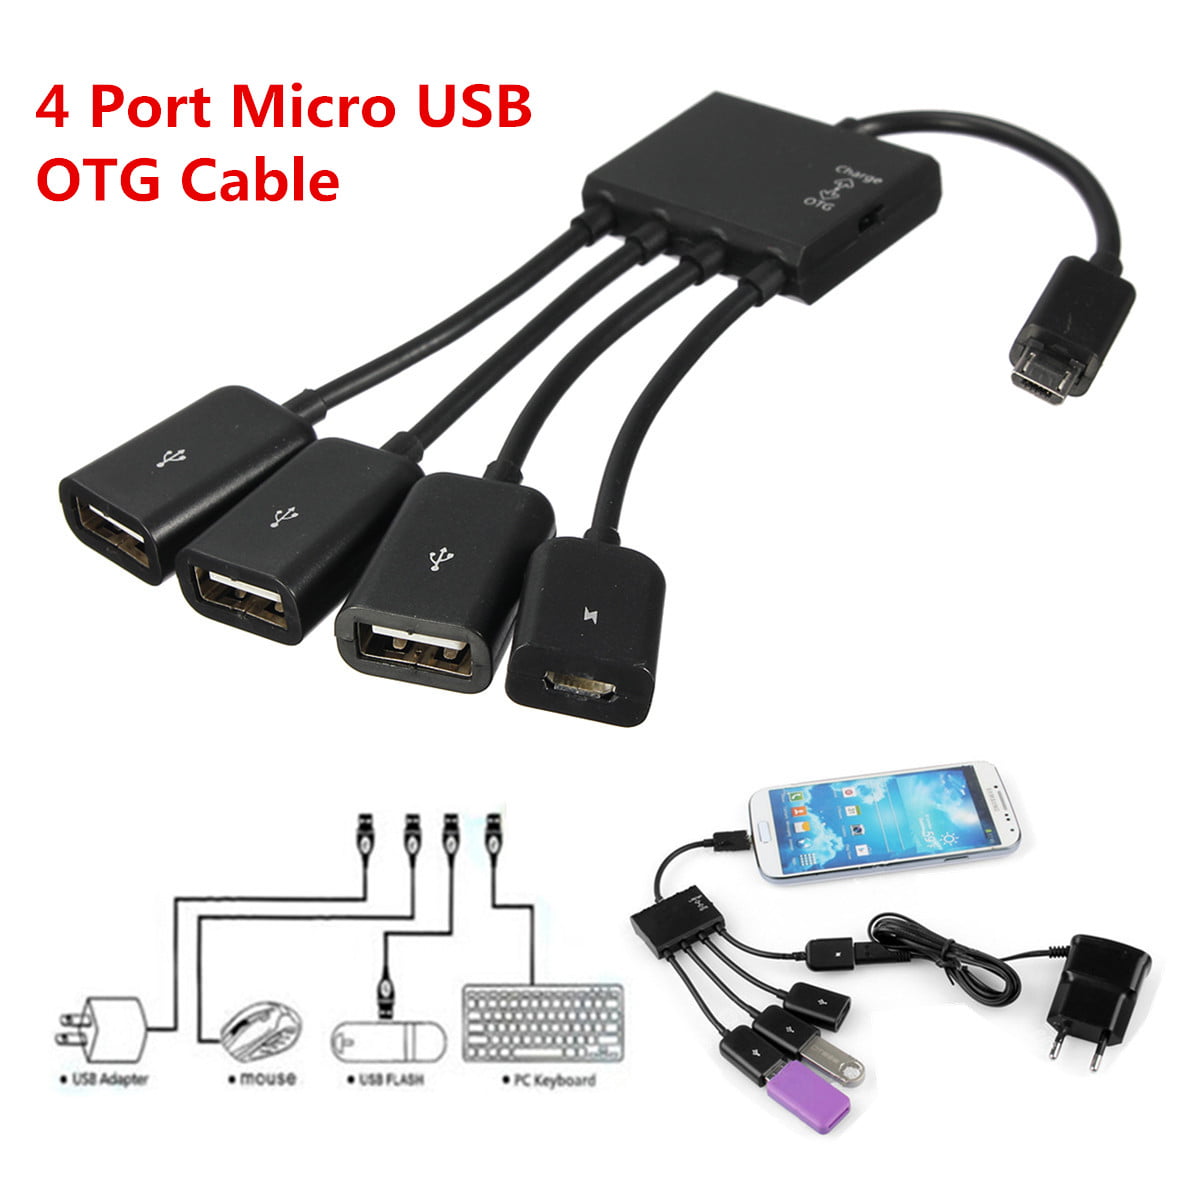 PRO OTG Power Cable Works for LG D950 with Power Connect to Any Compatible USB Accessory with MicroUSB